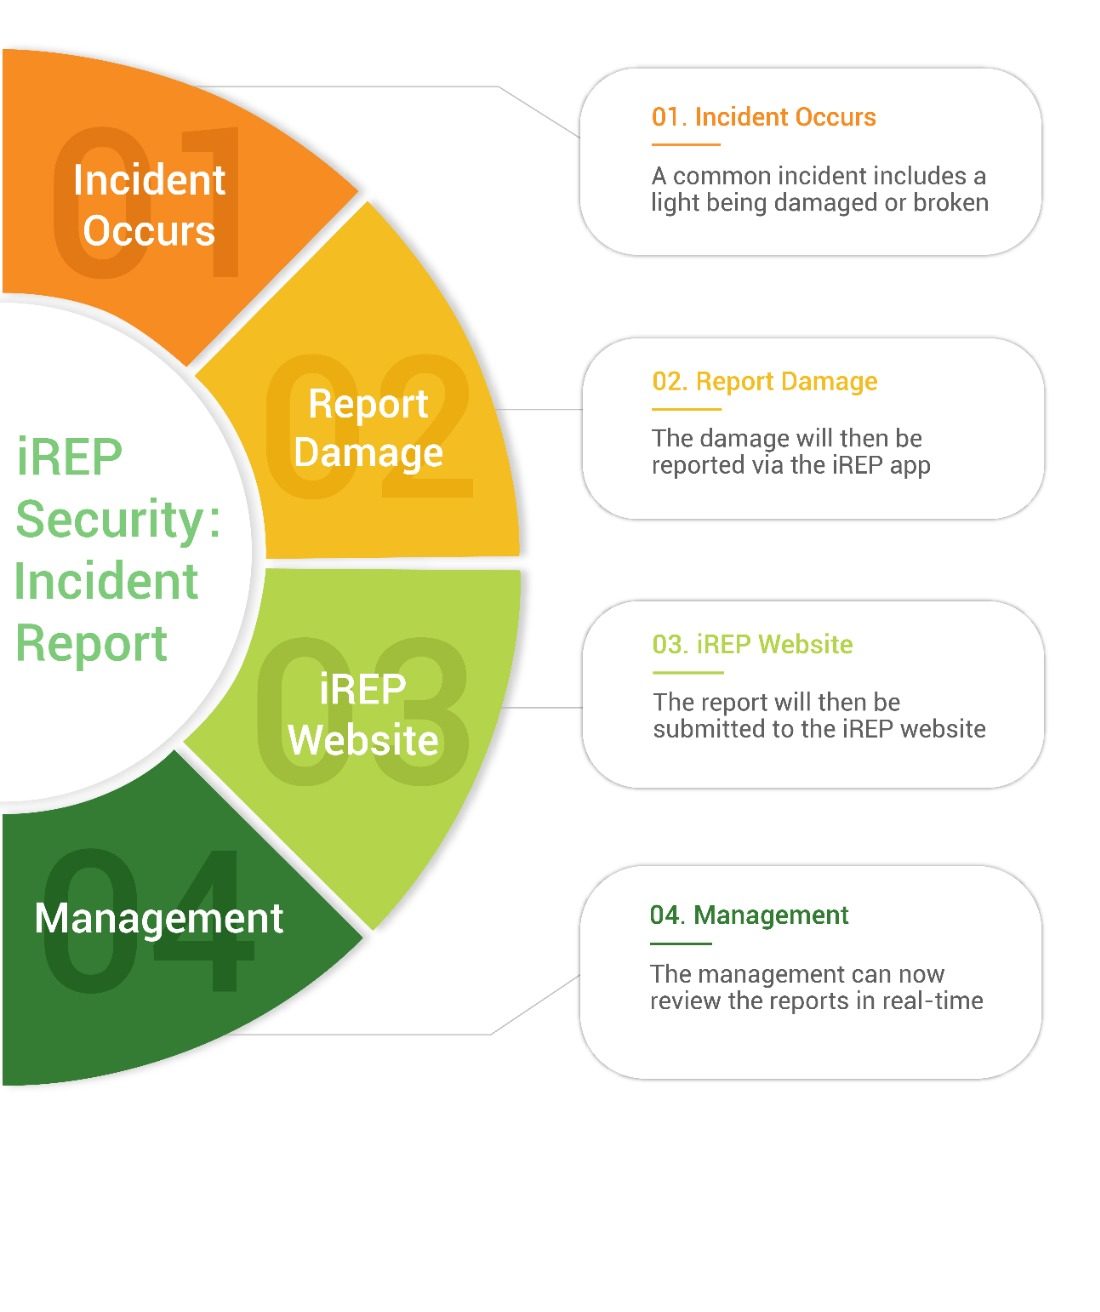 Incident report overview